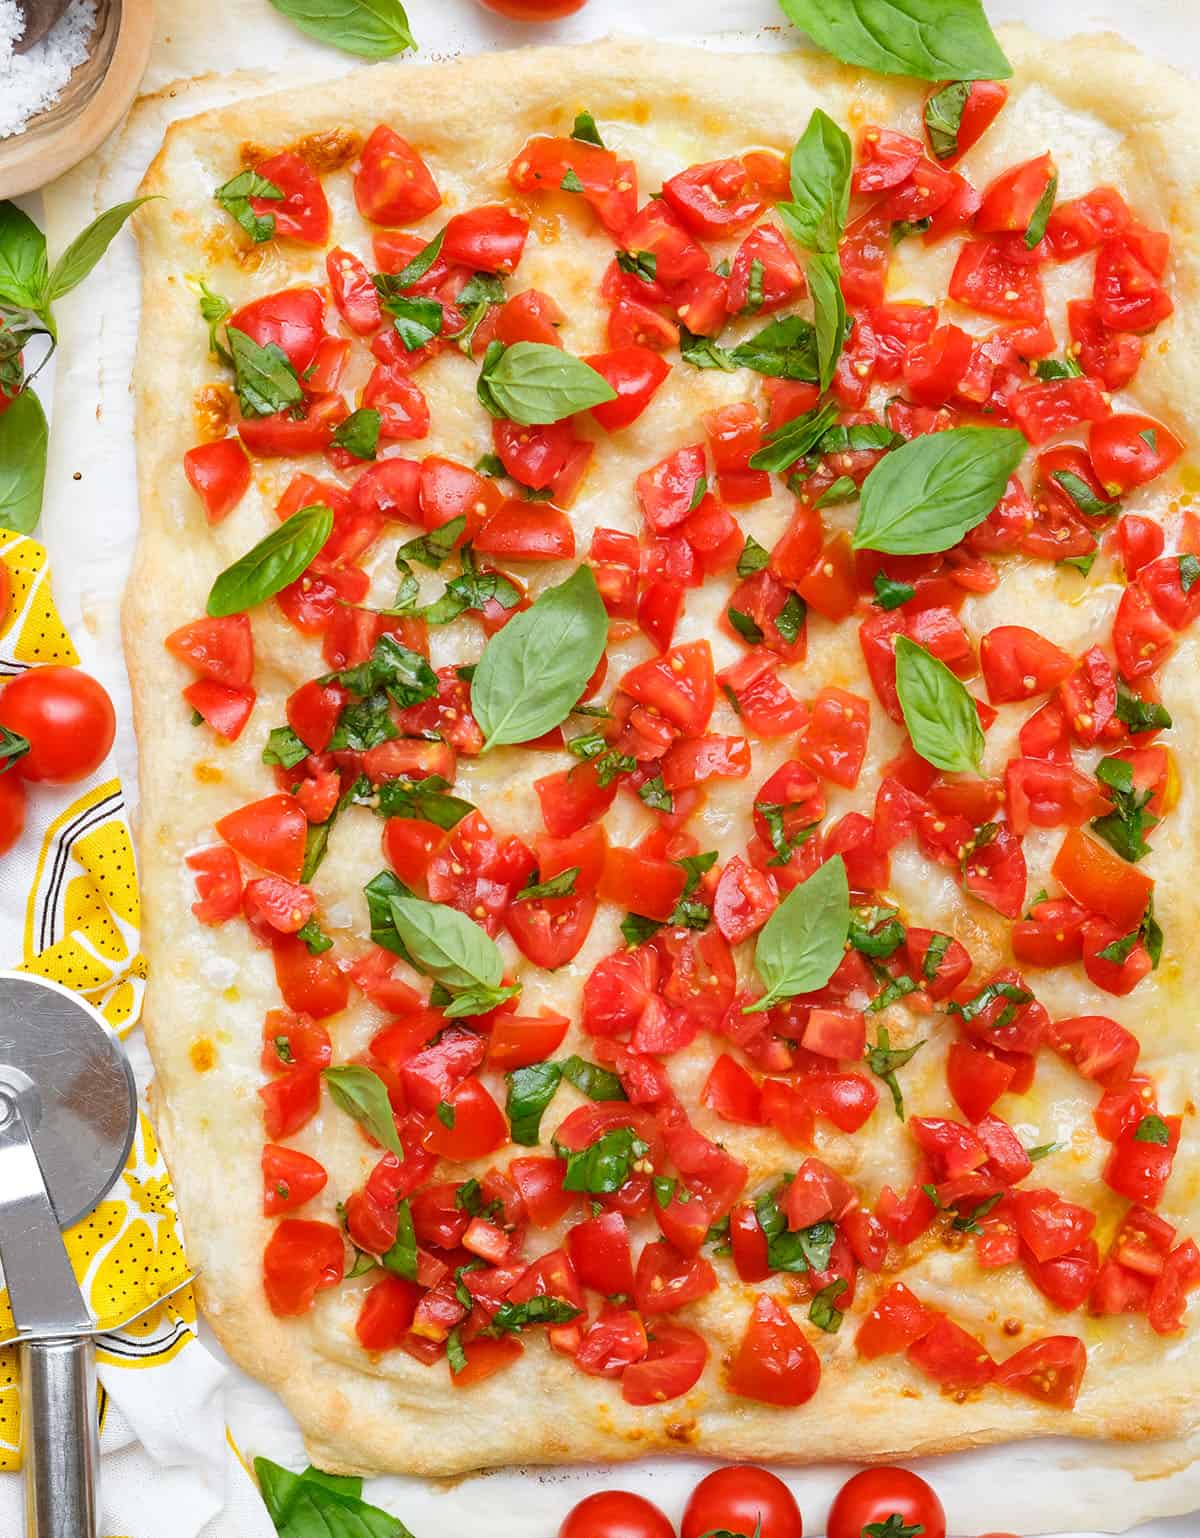 Top view of a large bruschetta pizza topped with diced fresh tomatoes and fresh basil leaves.